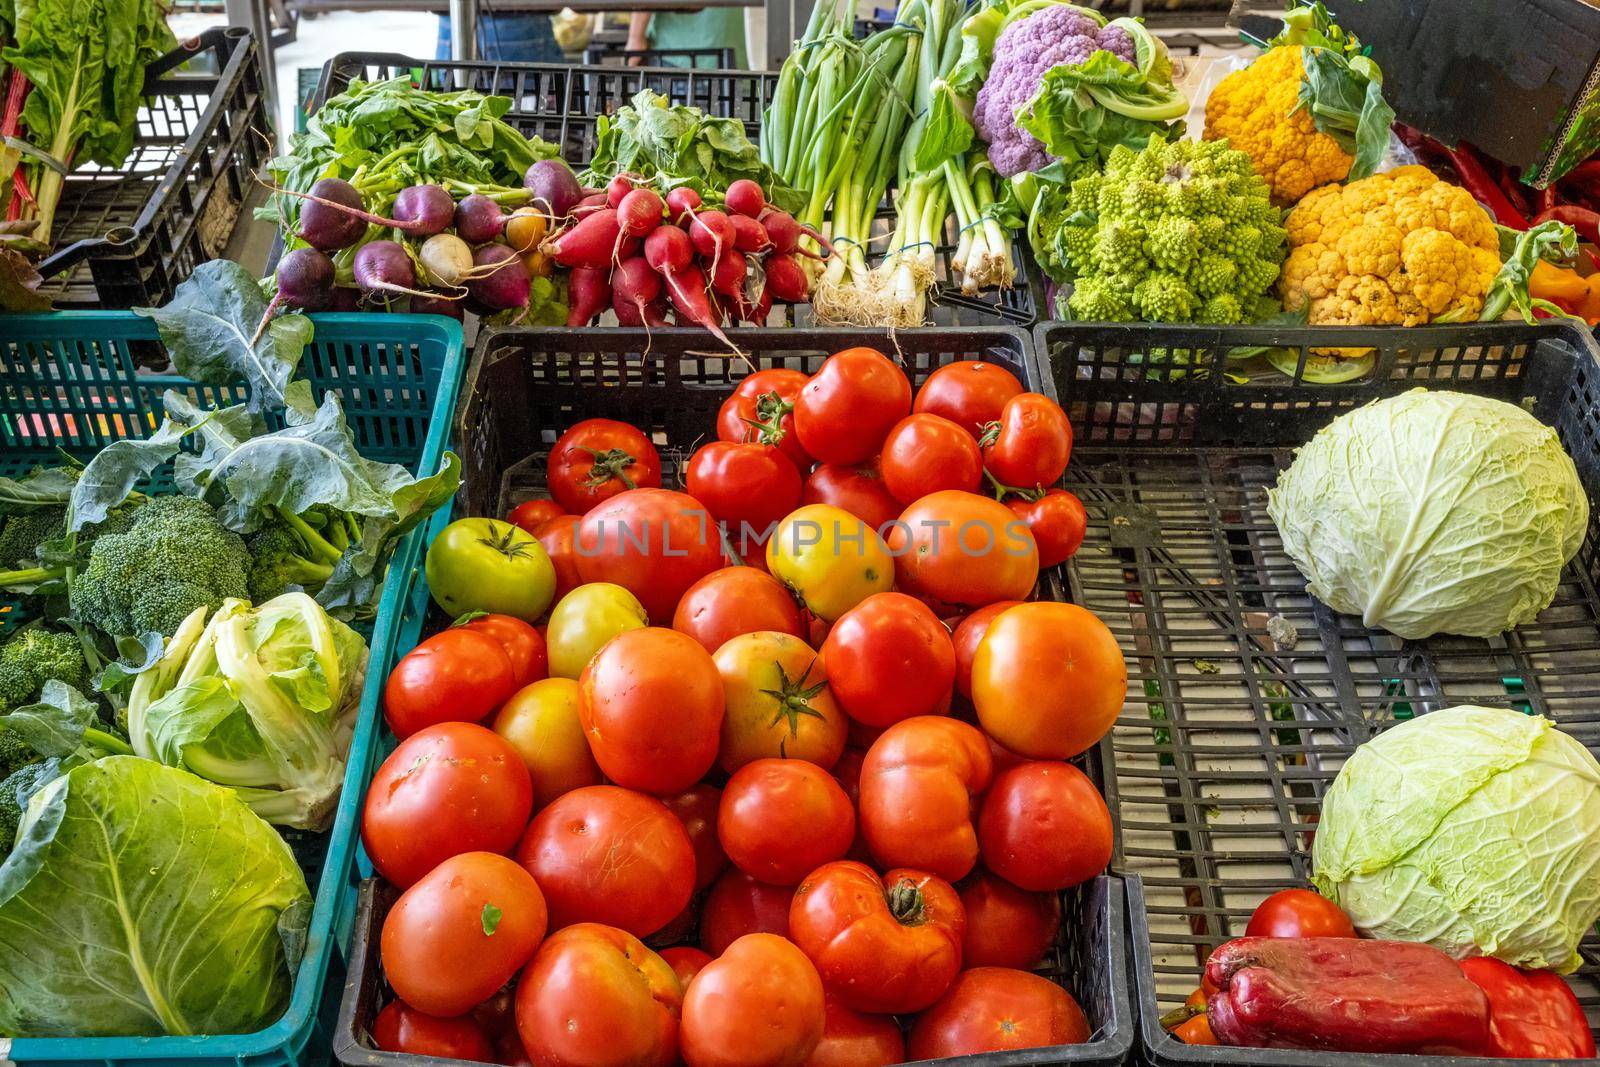 Tomatoes and other vegetables for sale at a market